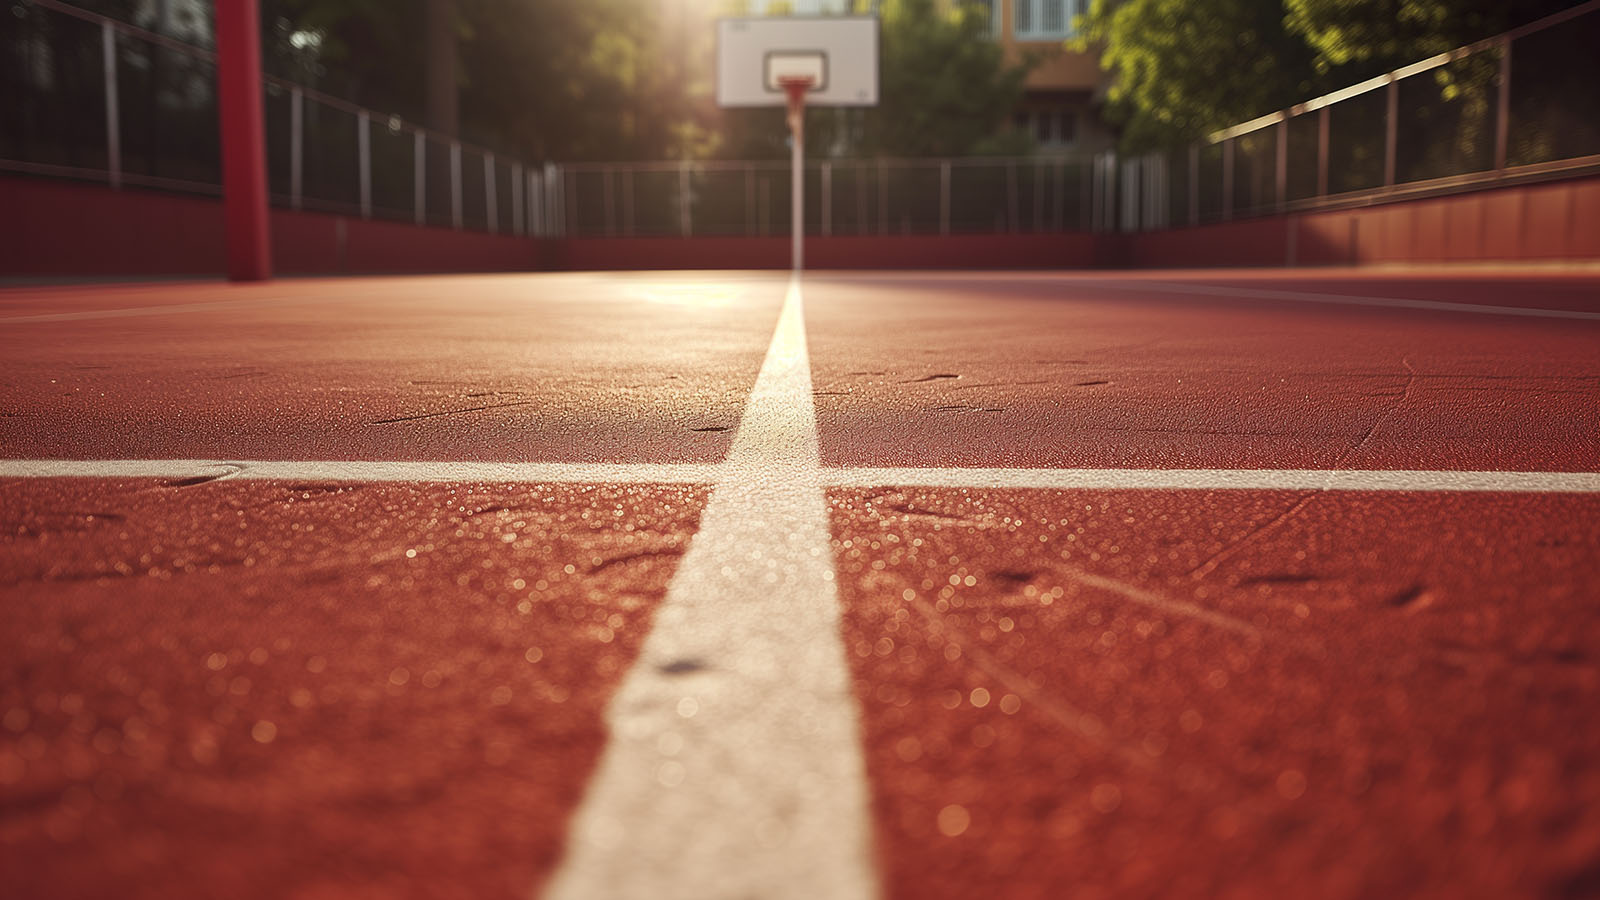 Enhanced Athletic Performance on Rubber-Surfaced Sports Courts